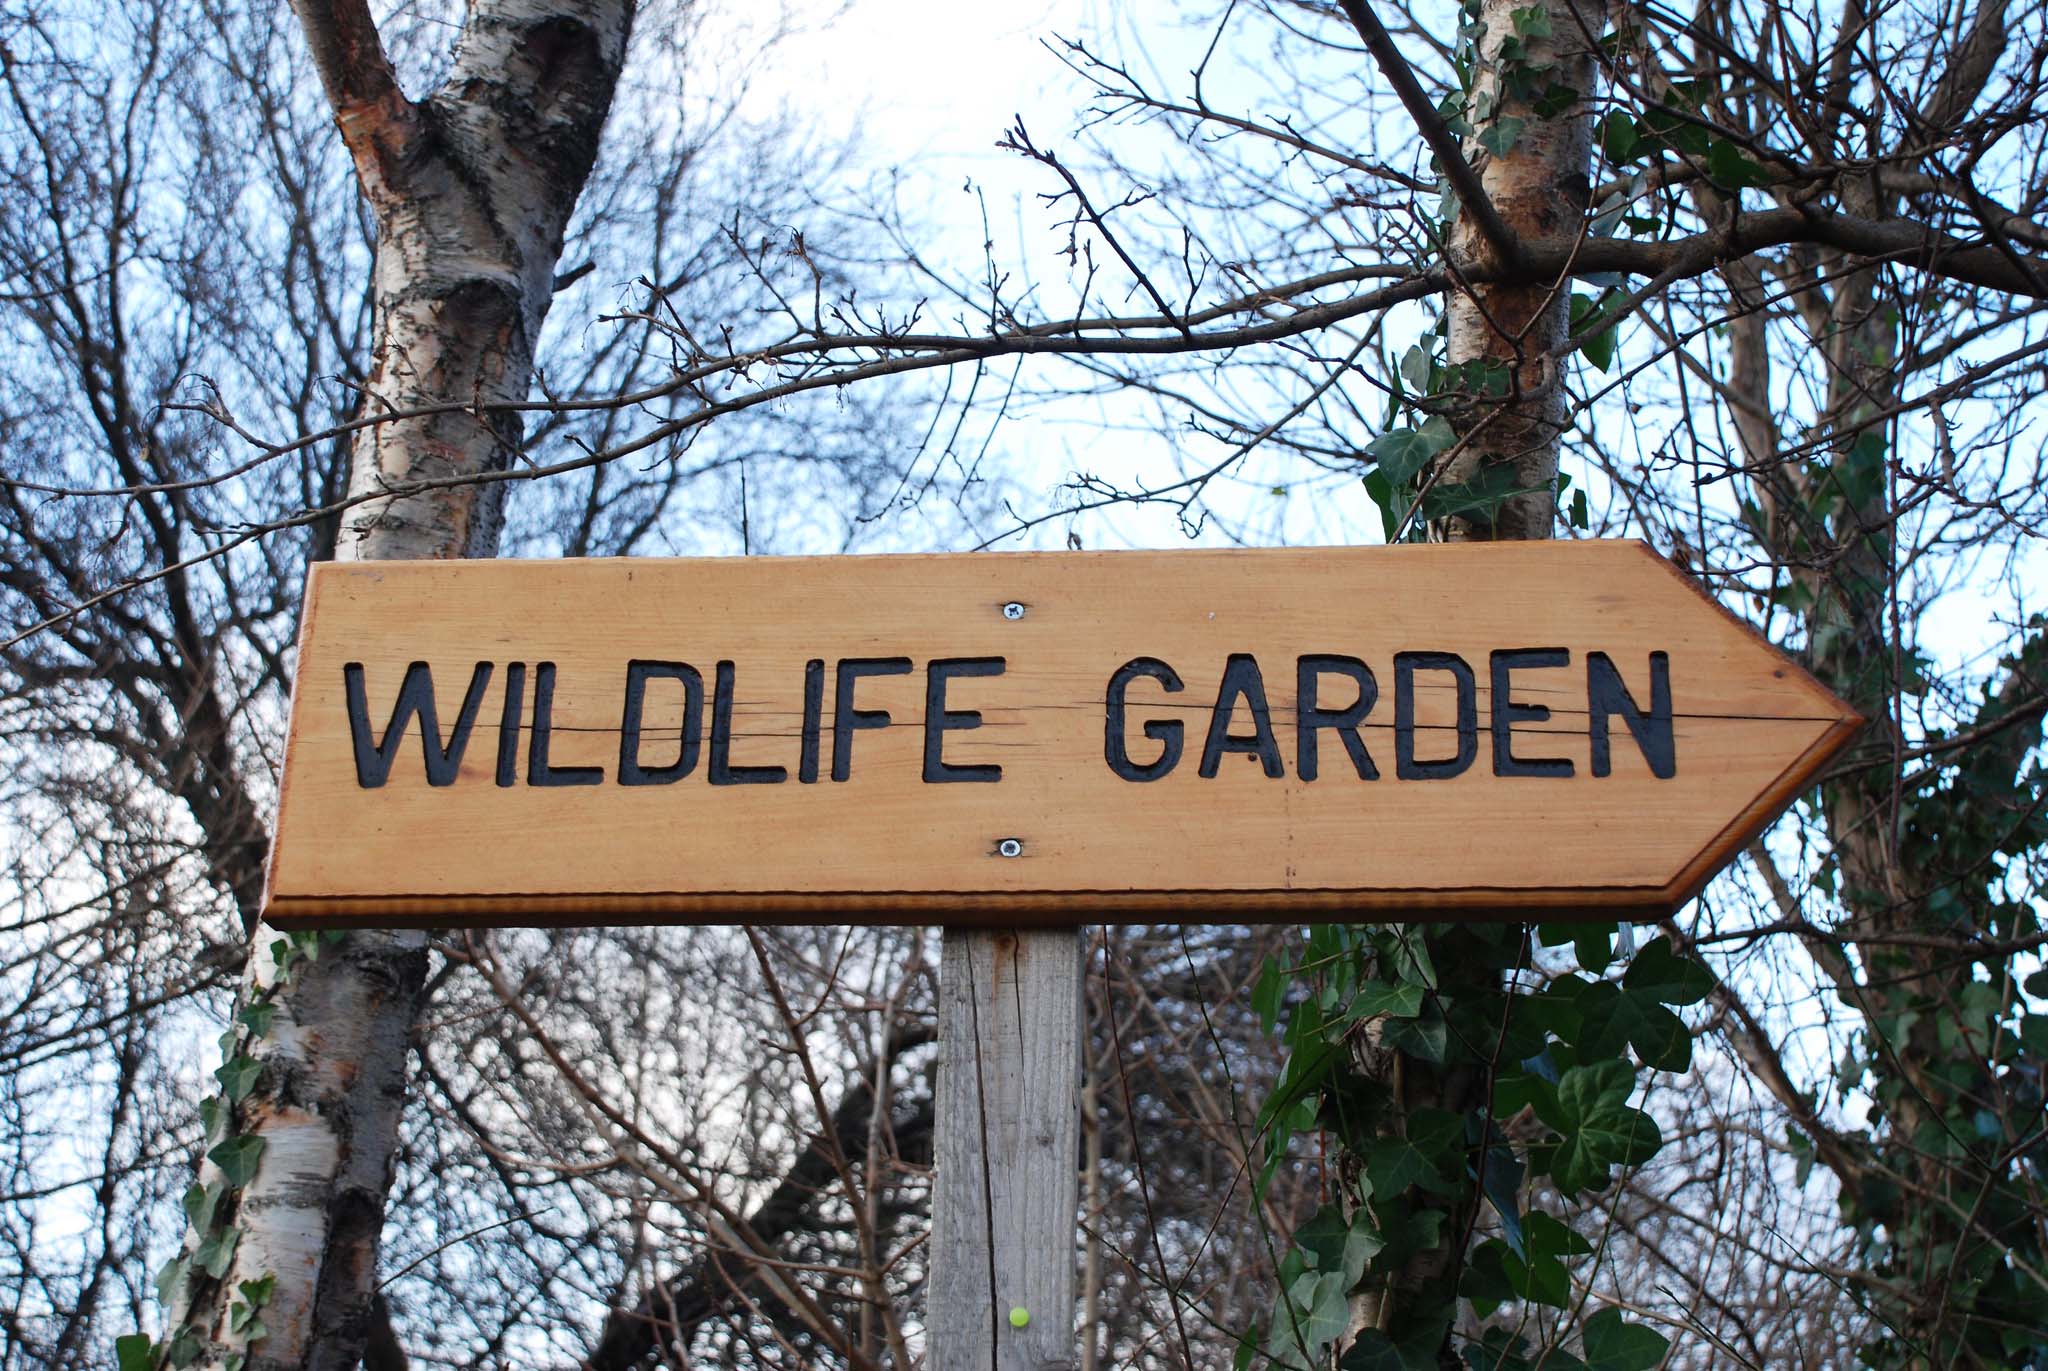 In a forest, a sign reads "wildlife garden"